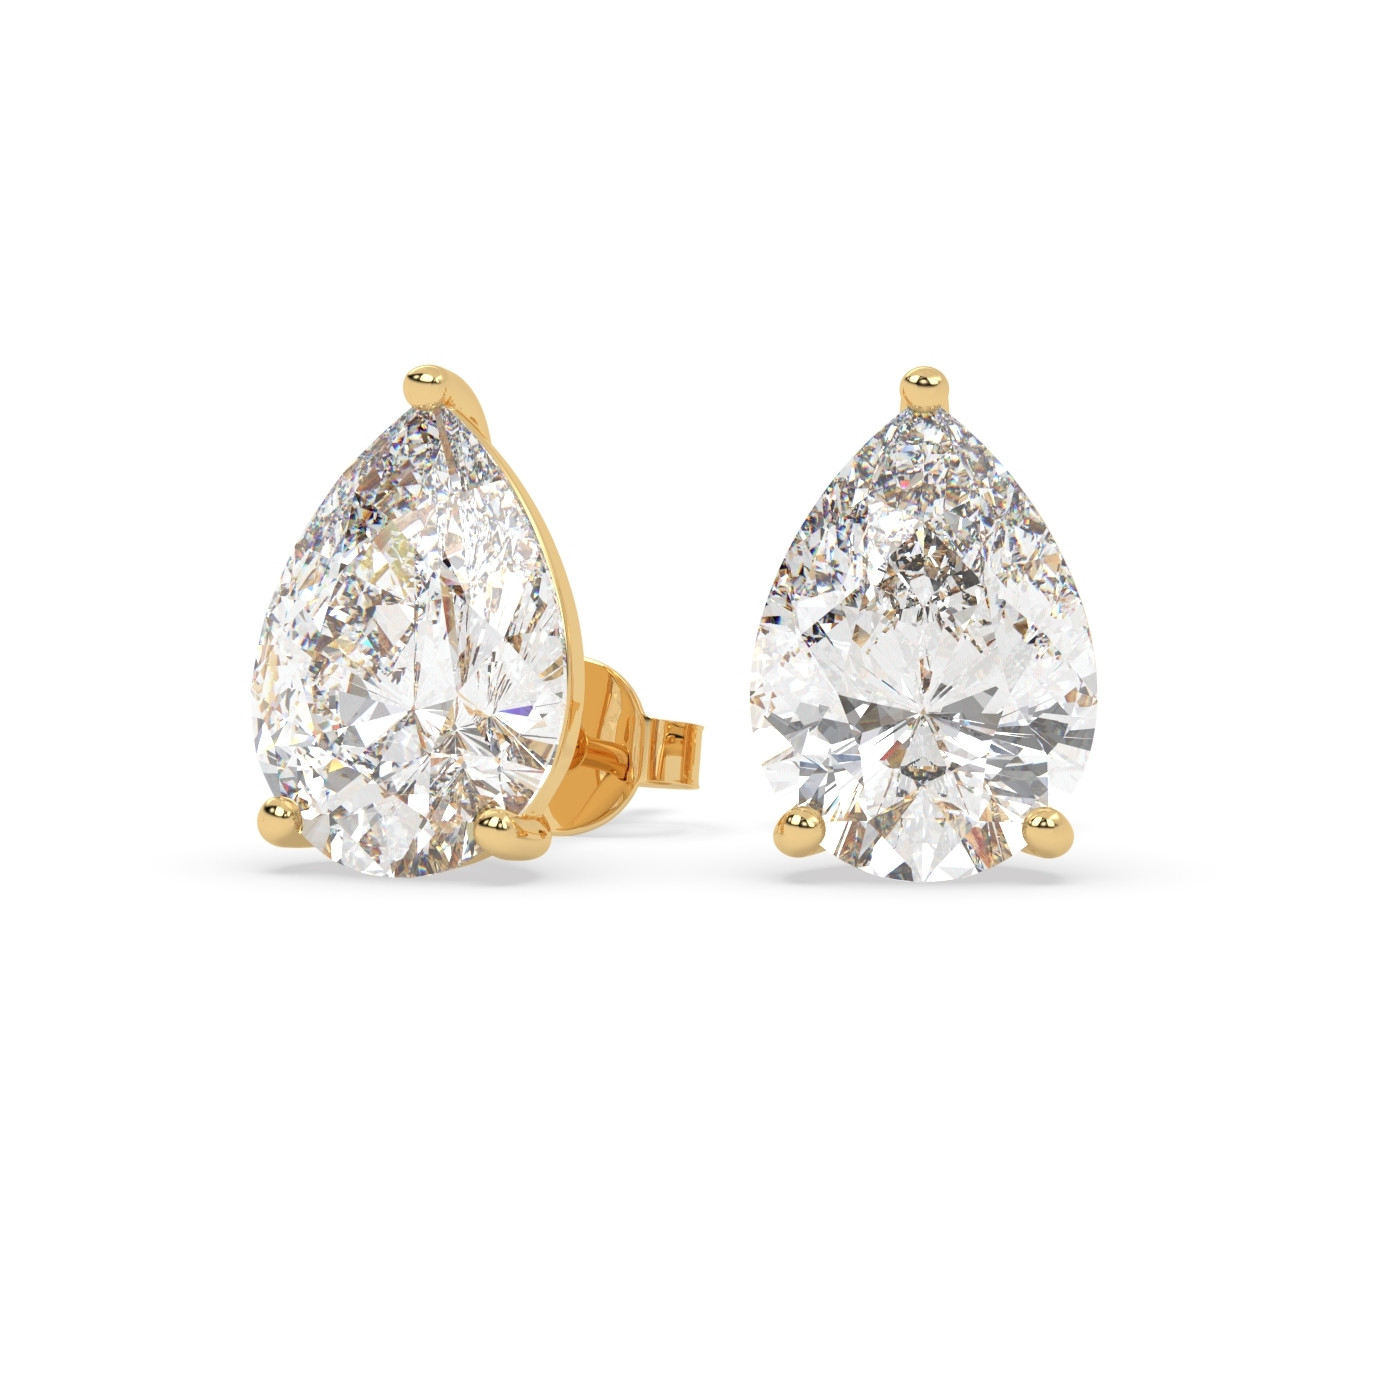 18K YELLOW GOLD Pear Stud Earrings with butterfly back